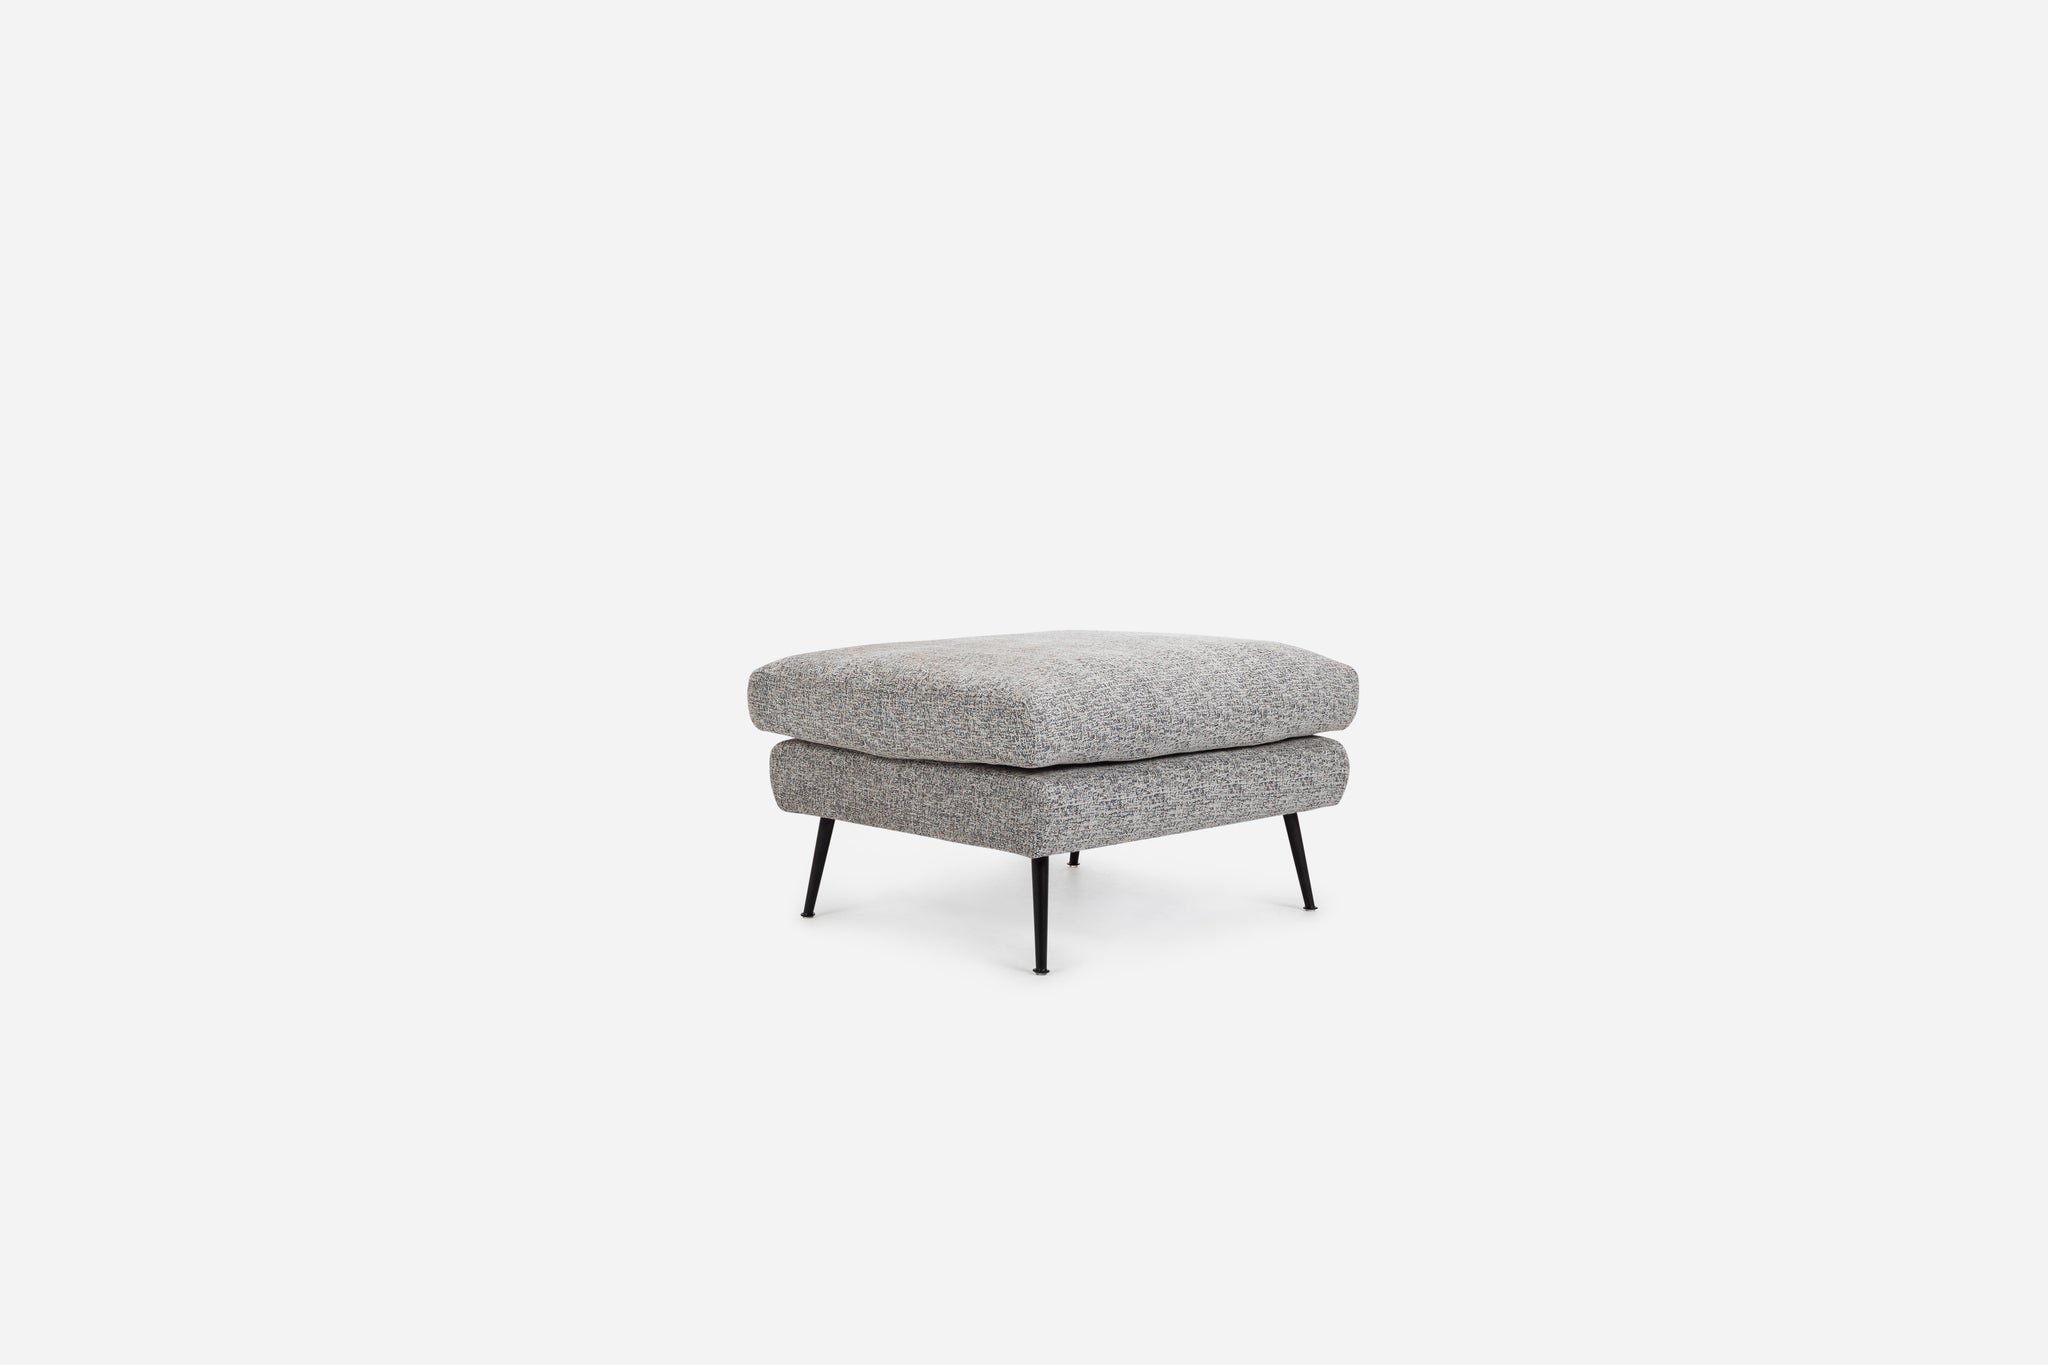 park ottoman shown in grey fabric with black legs